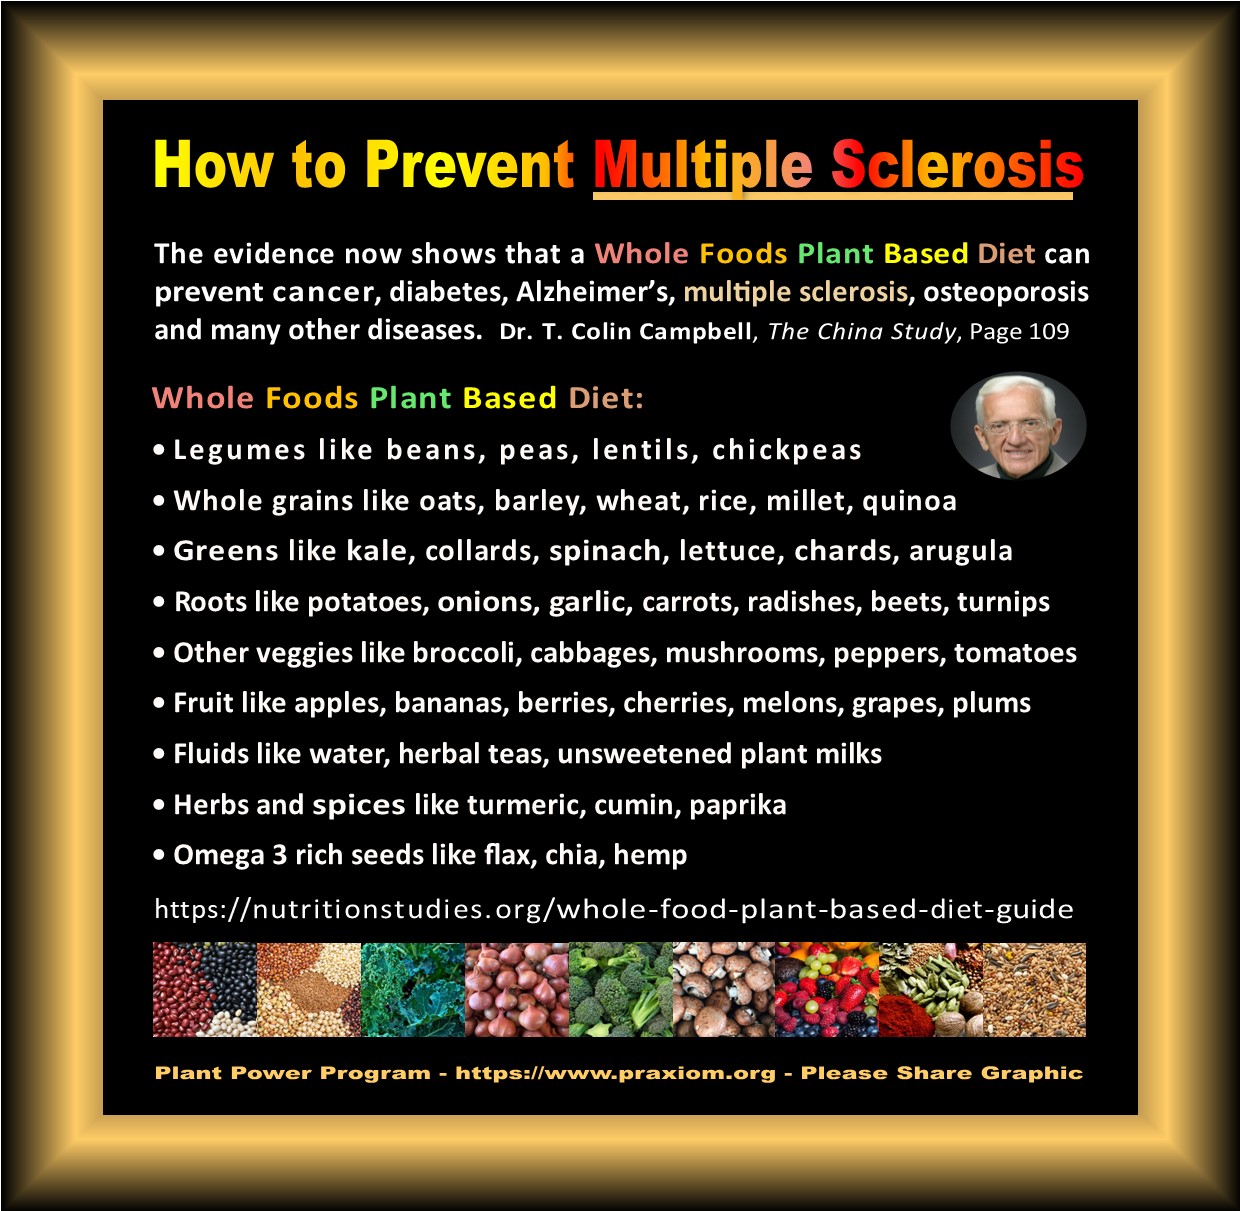 Hot to prevent multiple
        sclerosis